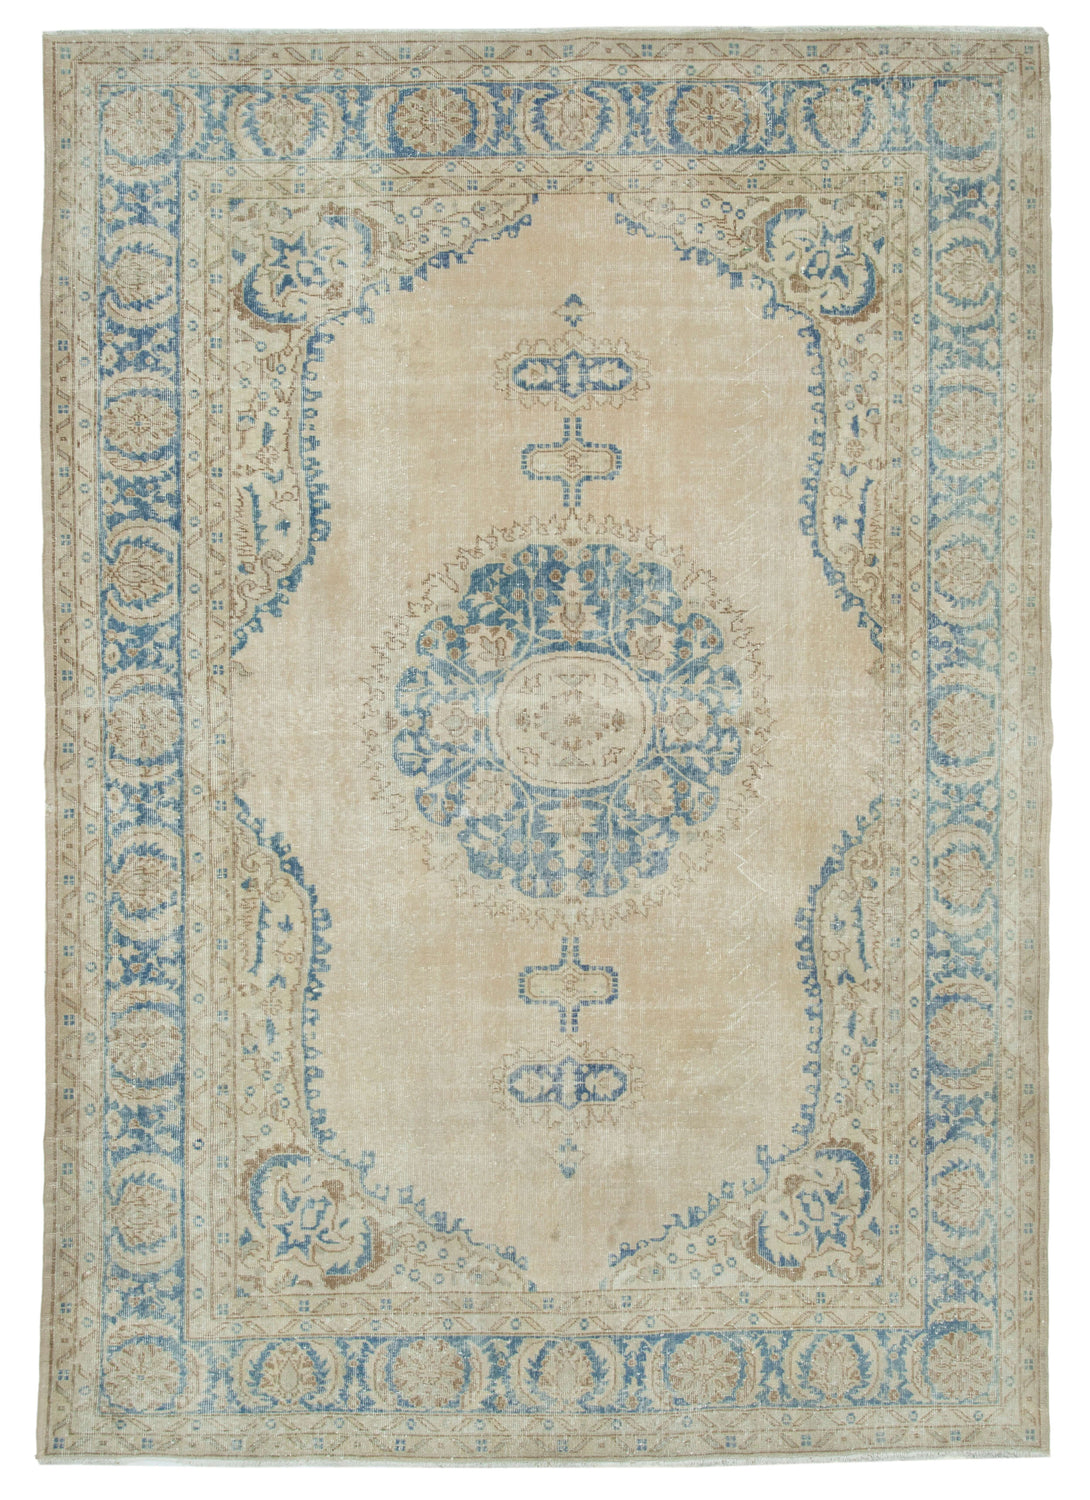 Handmade White Wash Area Rug > Design# OL-AC-33988 > Size: 7'-2" x 10'-2", Carpet Culture Rugs, Handmade Rugs, NYC Rugs, New Rugs, Shop Rugs, Rug Store, Outlet Rugs, SoHo Rugs, Rugs in USA